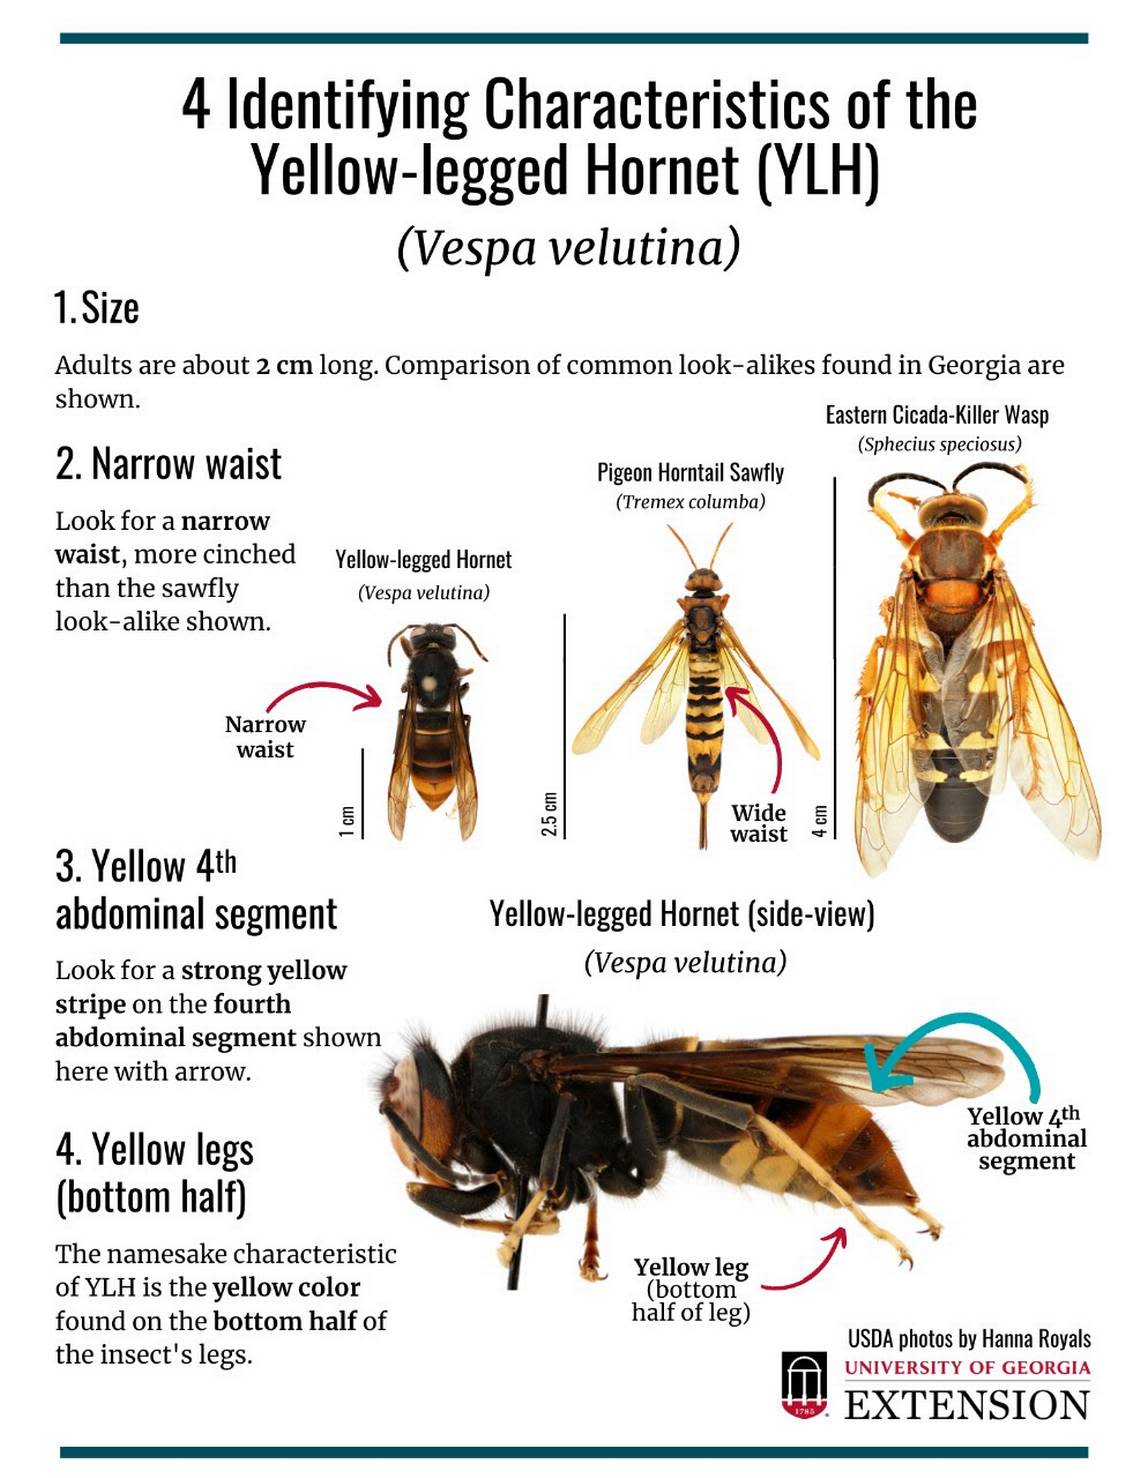 How to identify a yellow-legged hornet